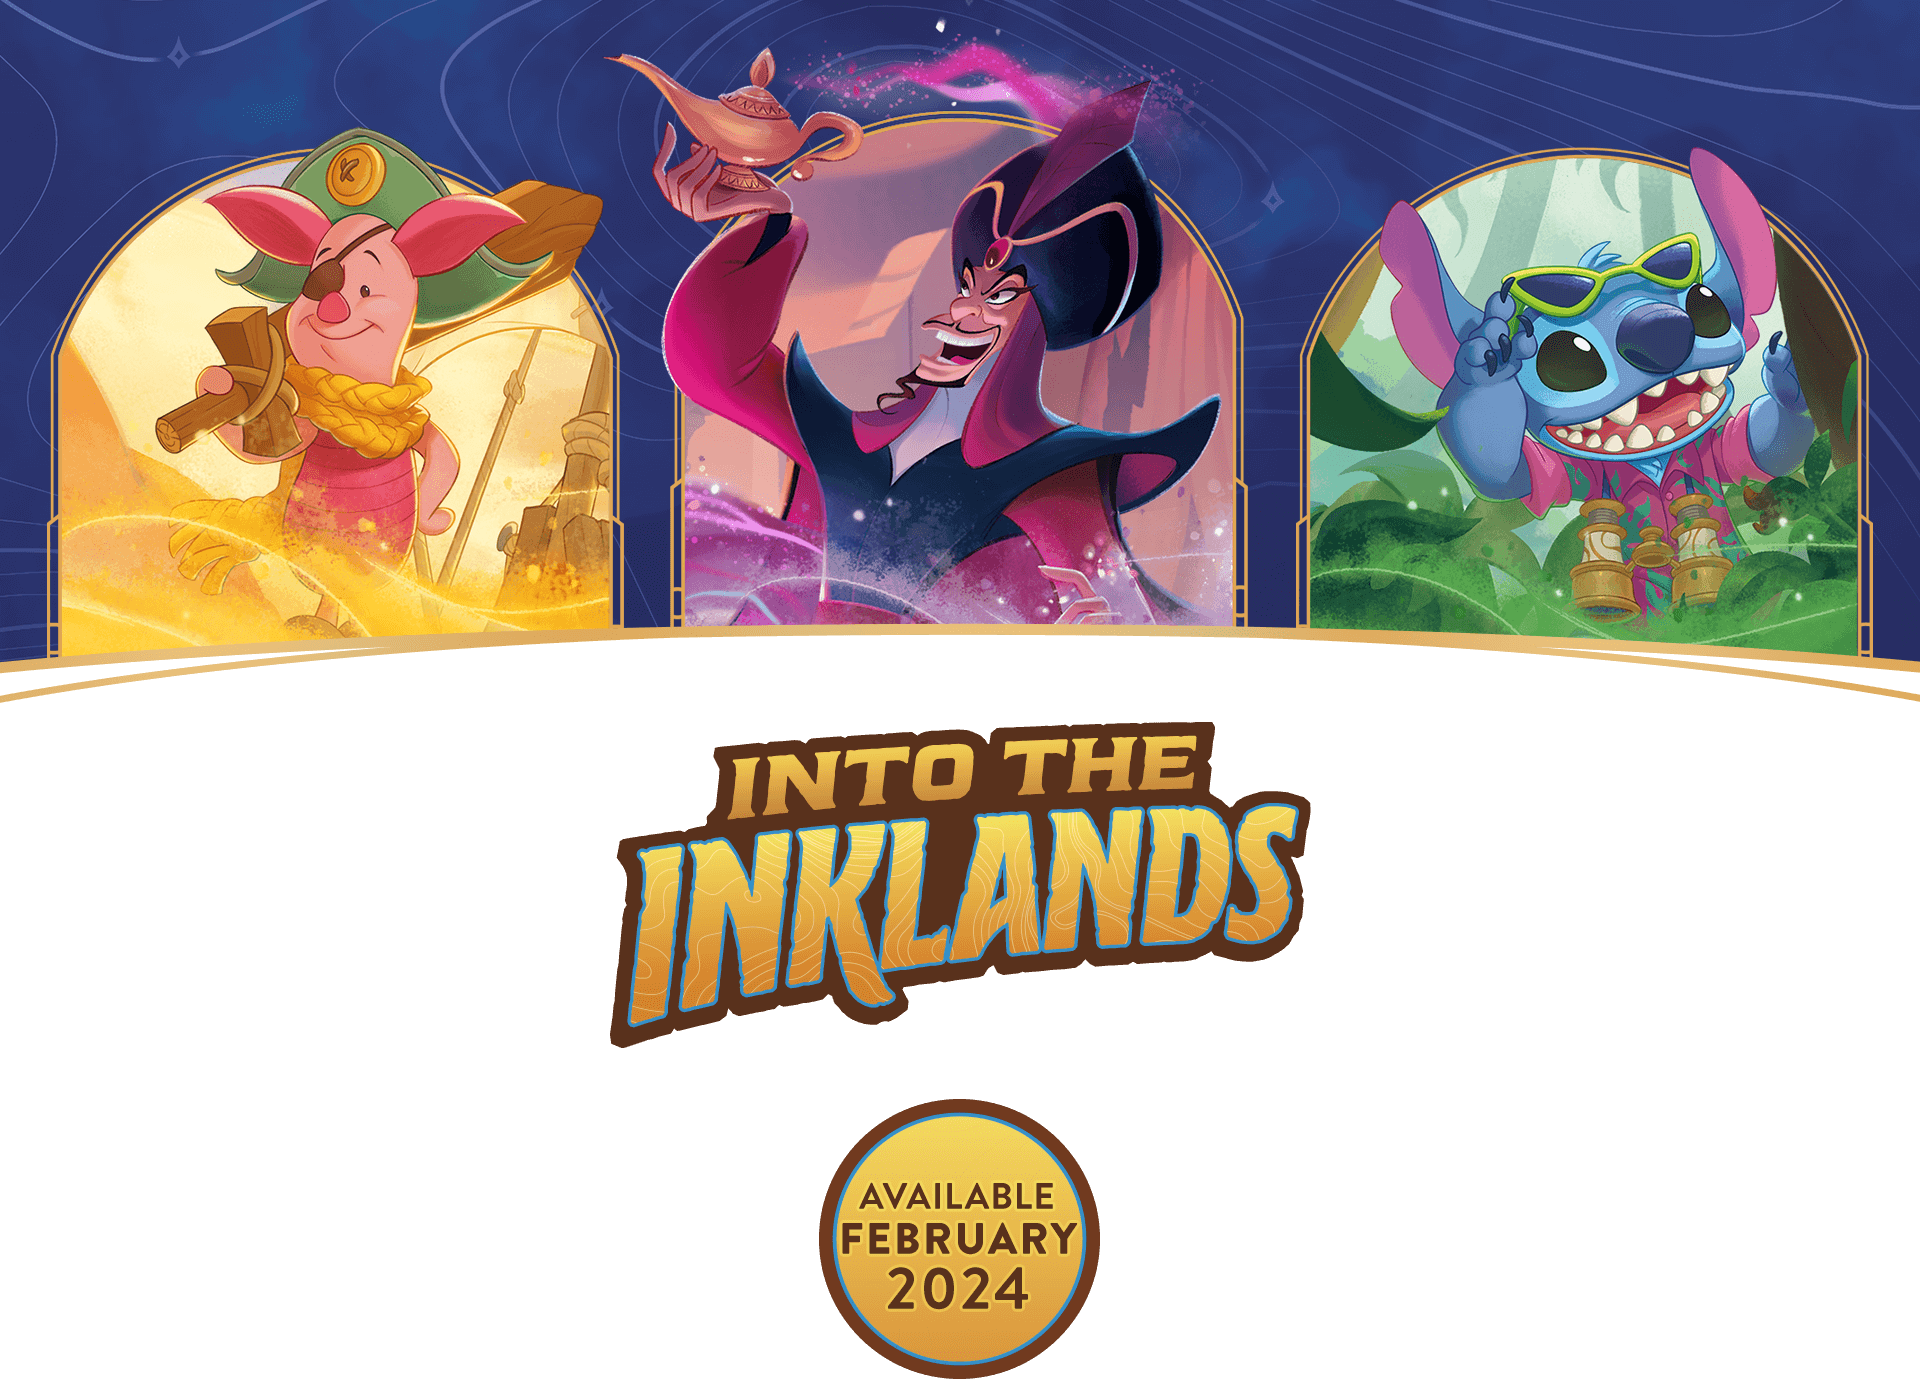 Decorative header image showing three characters (left to right: Piglet, Jafar, Stitch) and a logo that says INTO THE INKLANDS. Available February 2024